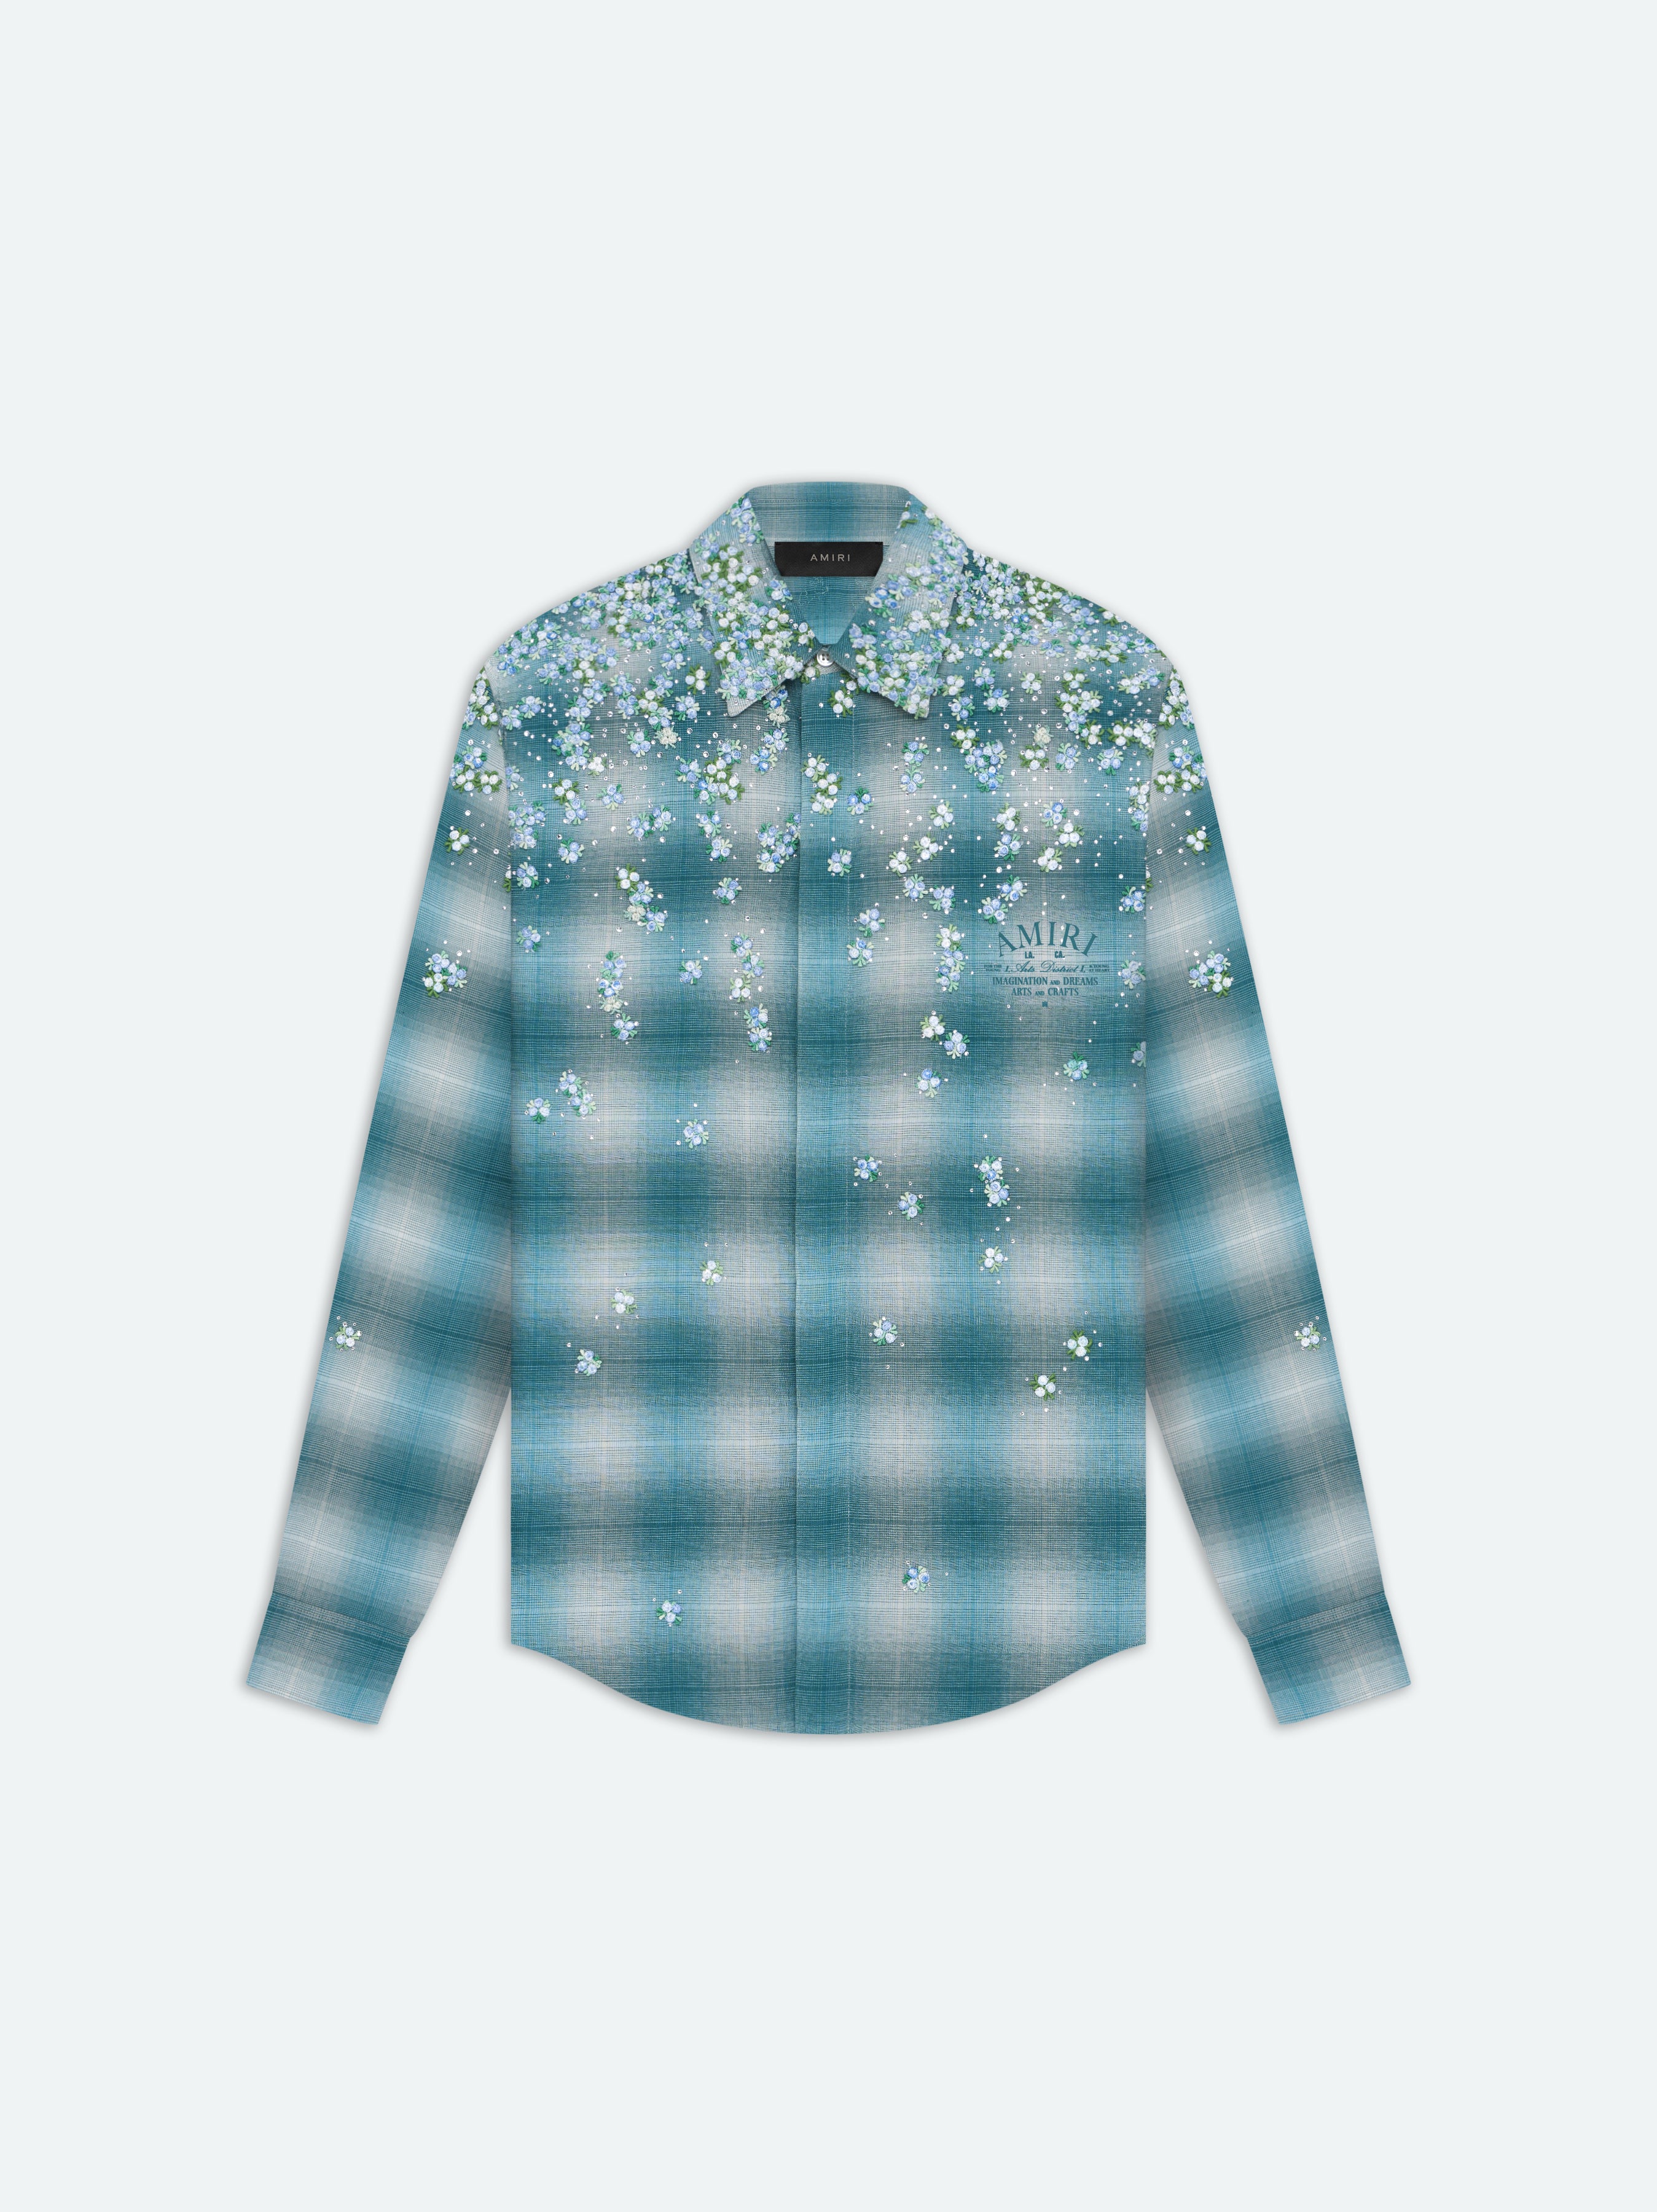 Product FLORAL FLANNEL - Blue featured image